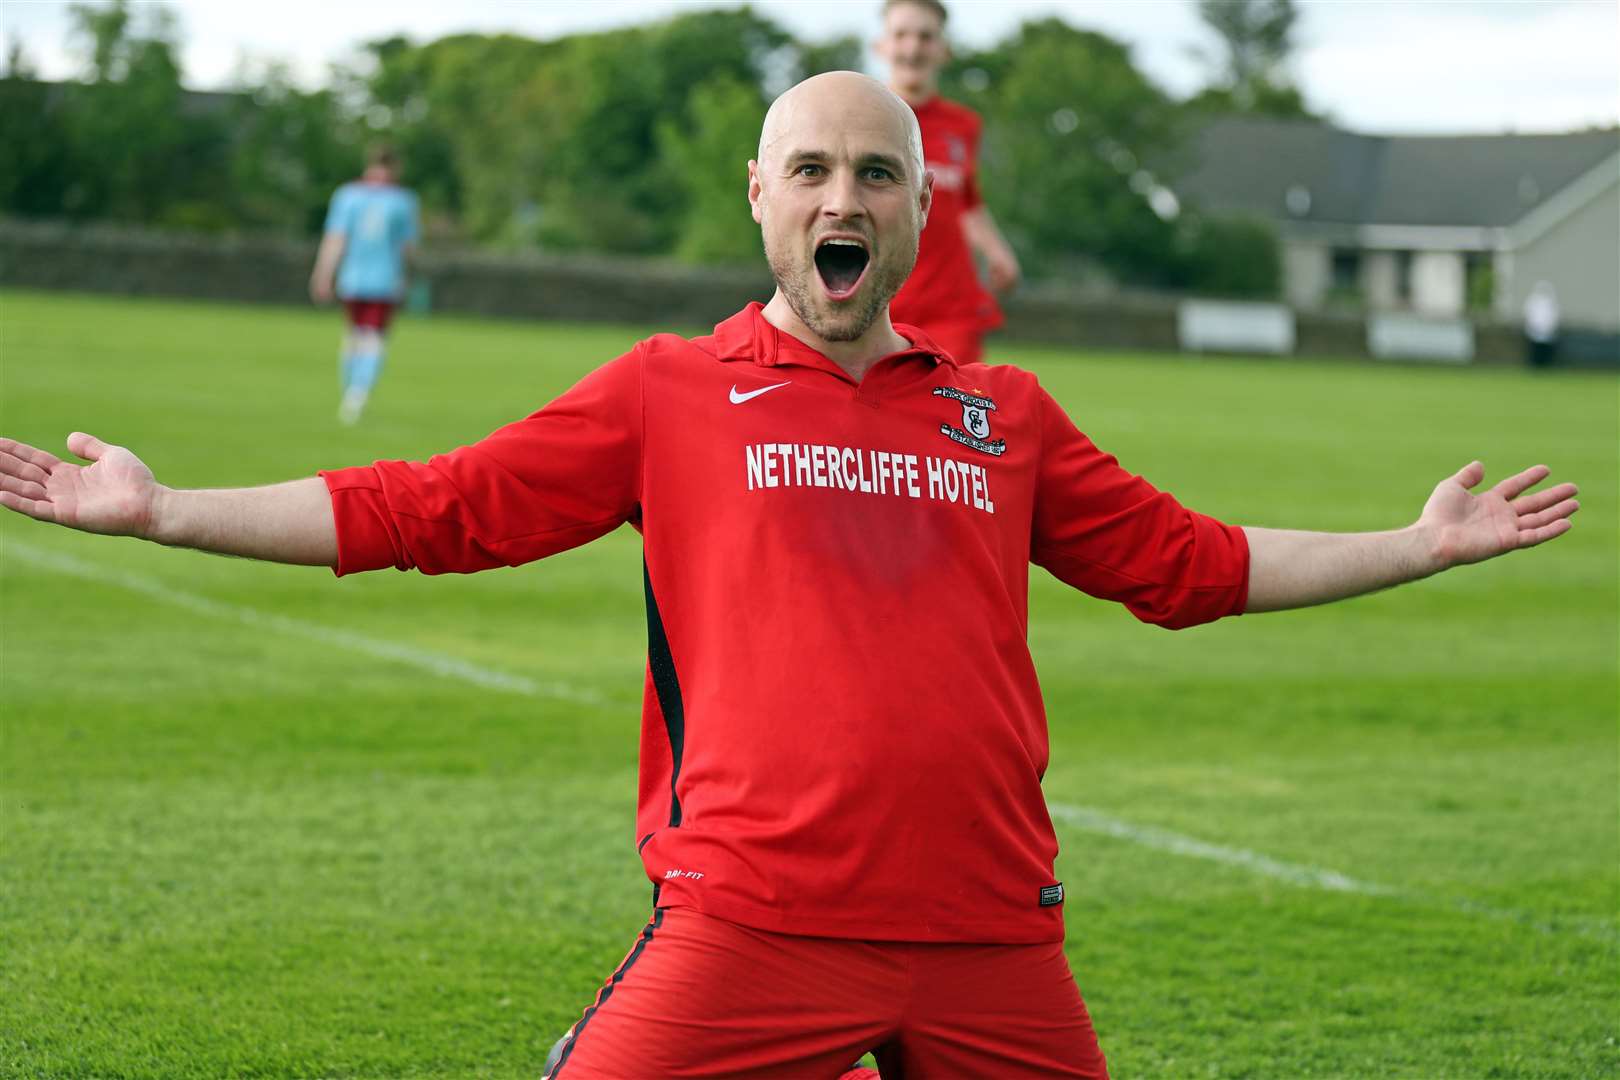 A delighted Sandy Sutherland performs a sliding celebration after Wick Groats' third goal. His side went on to beat Pentland United 5-2 to win the Colin Macleod Memorial Cup final at Castletown. Picture: James Gunn